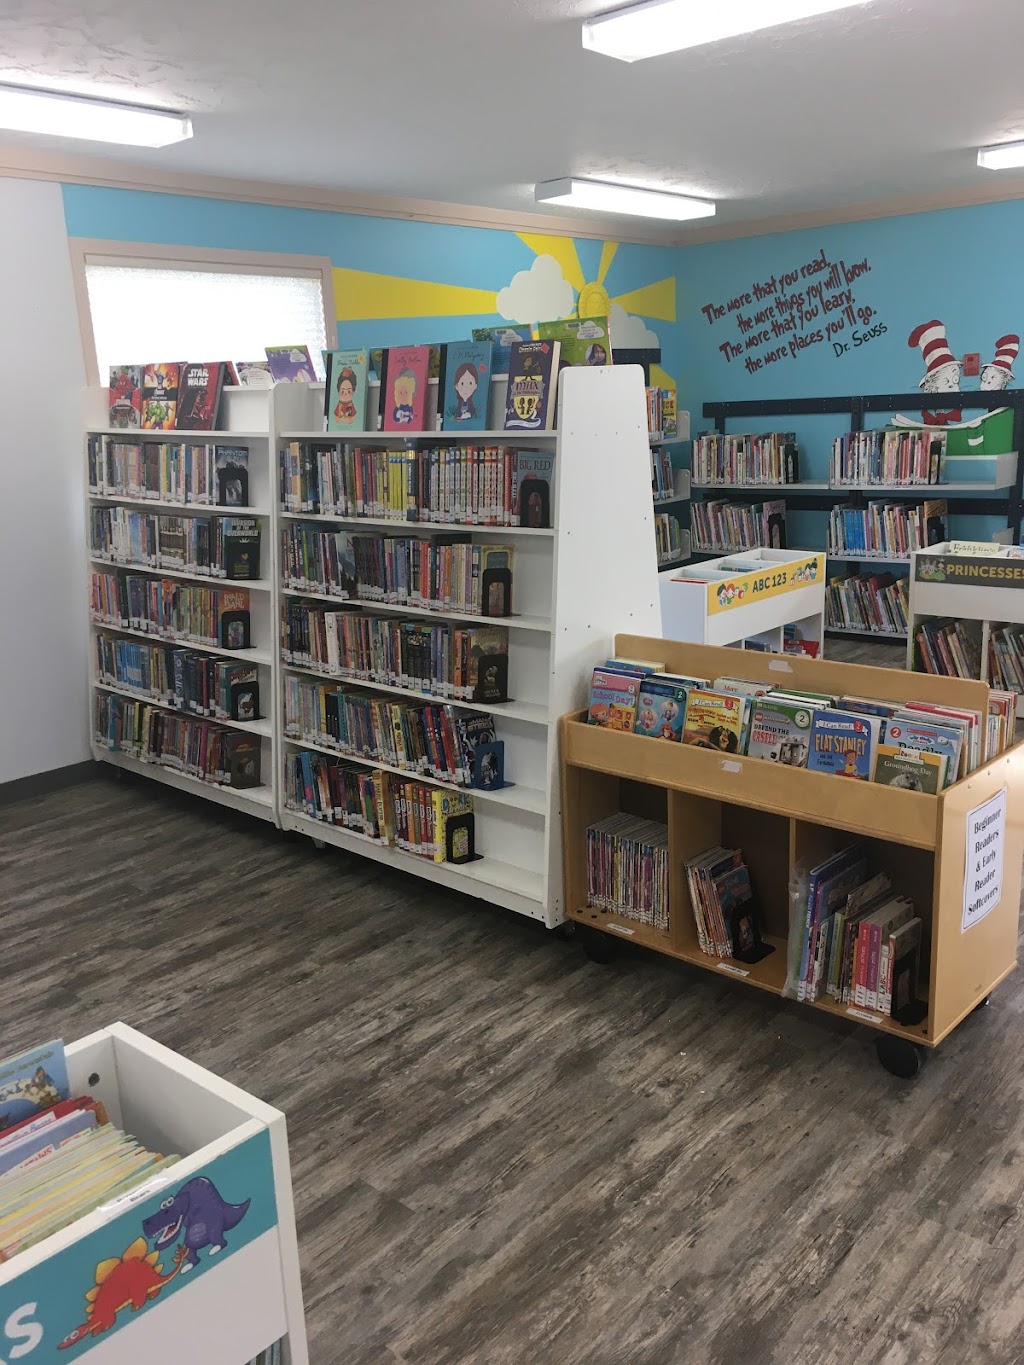 Eckville Municipal Library | library | 4855 51 Ave, Eckville, AB T0M 0X0, Canada | 4037463240 OR +1 403-746-3240